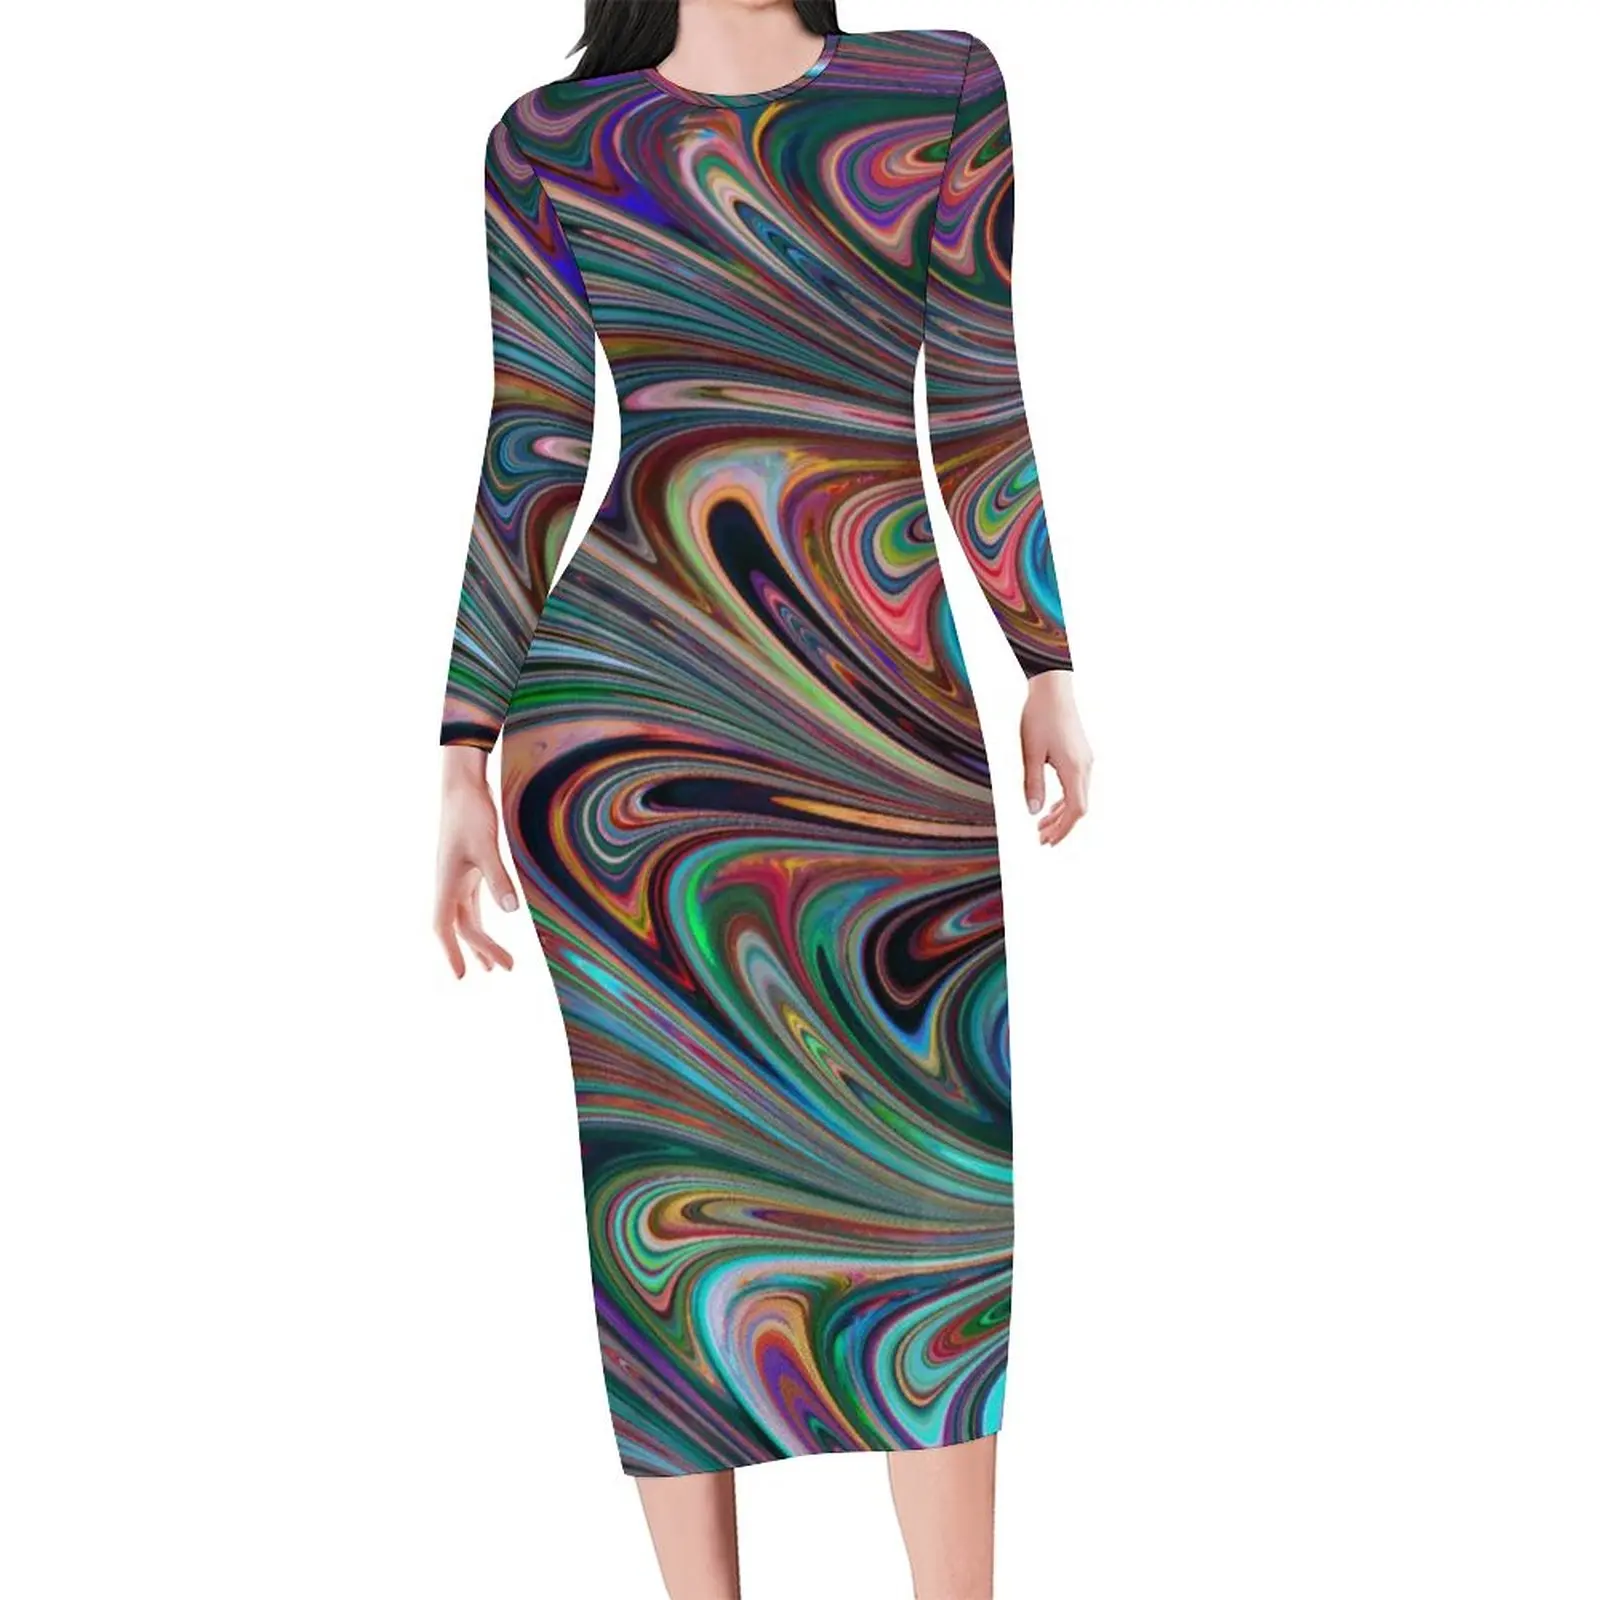 

Abstract Marble Bodycon Dress Woman Colorful Rainbow Swirls Retro Dresses Summer Long Sleeve Aesthetic Graphic Dress Big Size